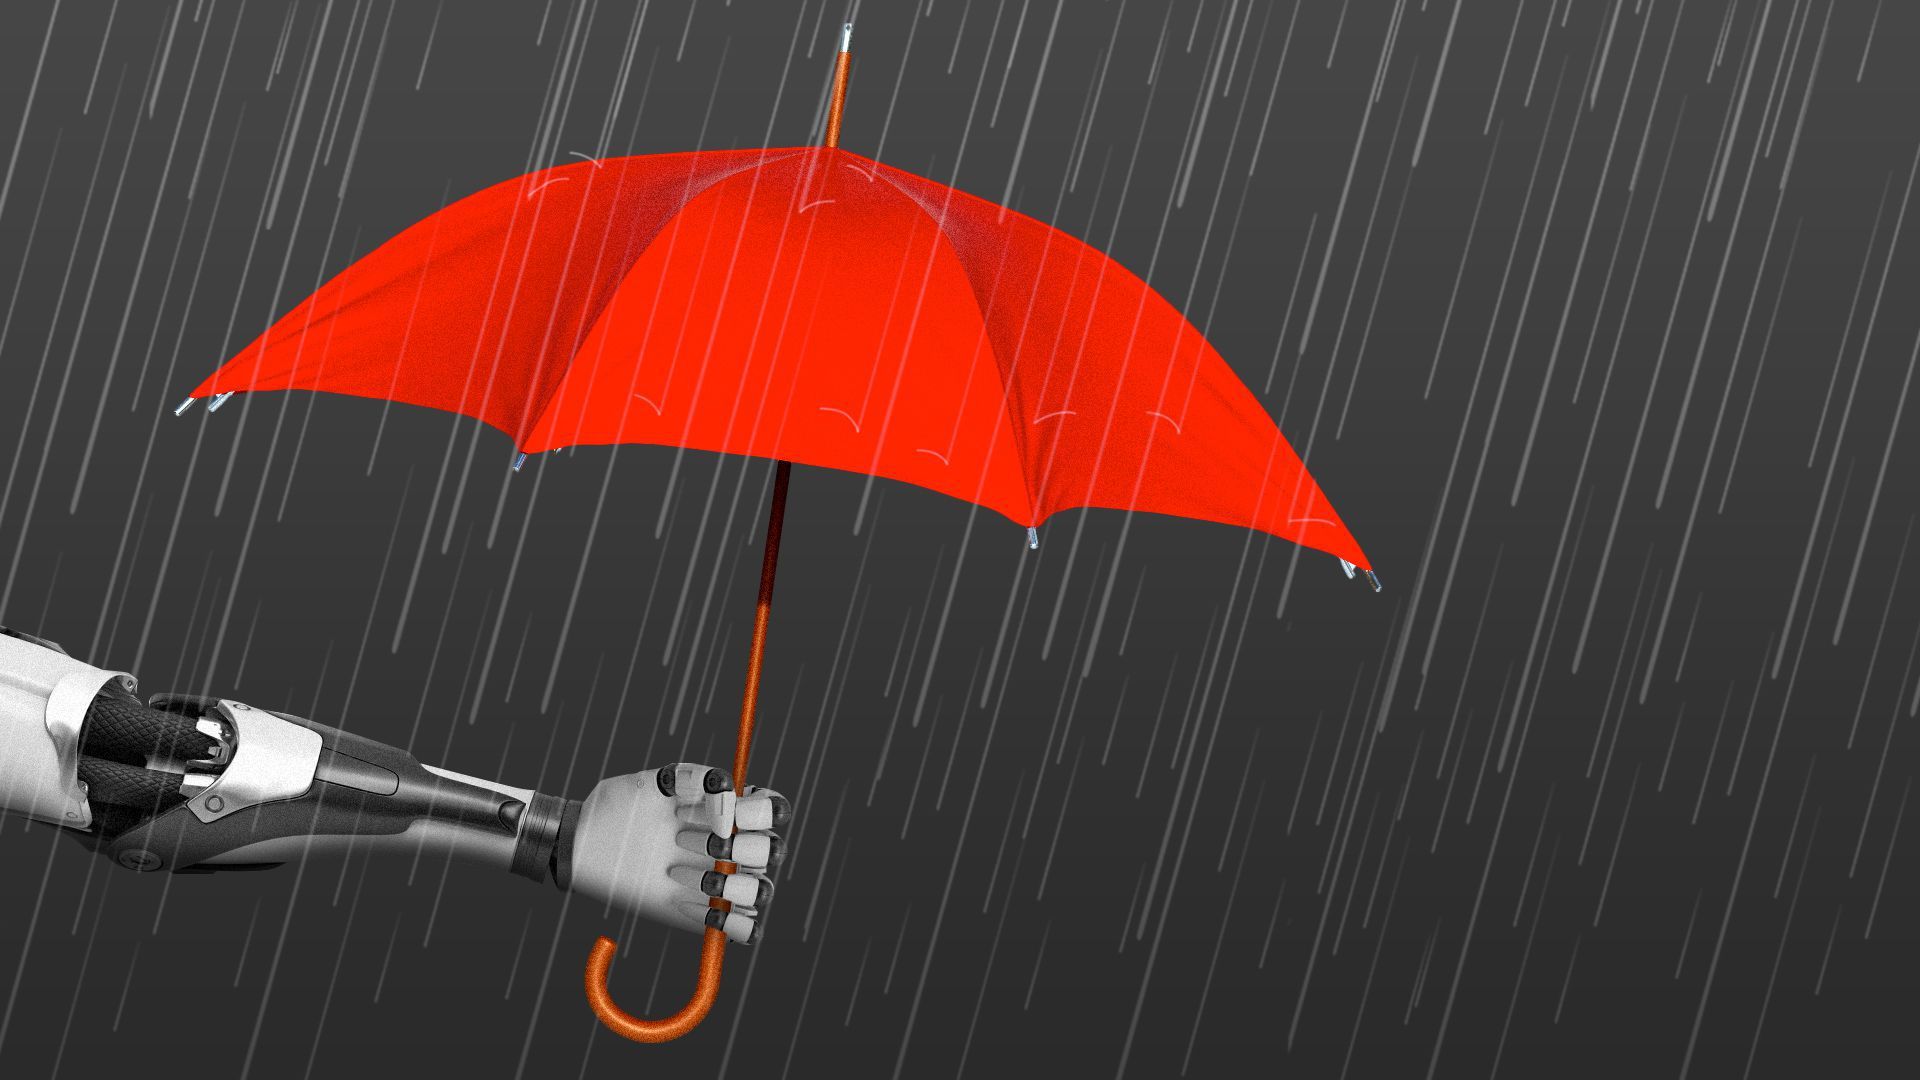 Illustration of a robotic arm holding an umbrella in the rain.